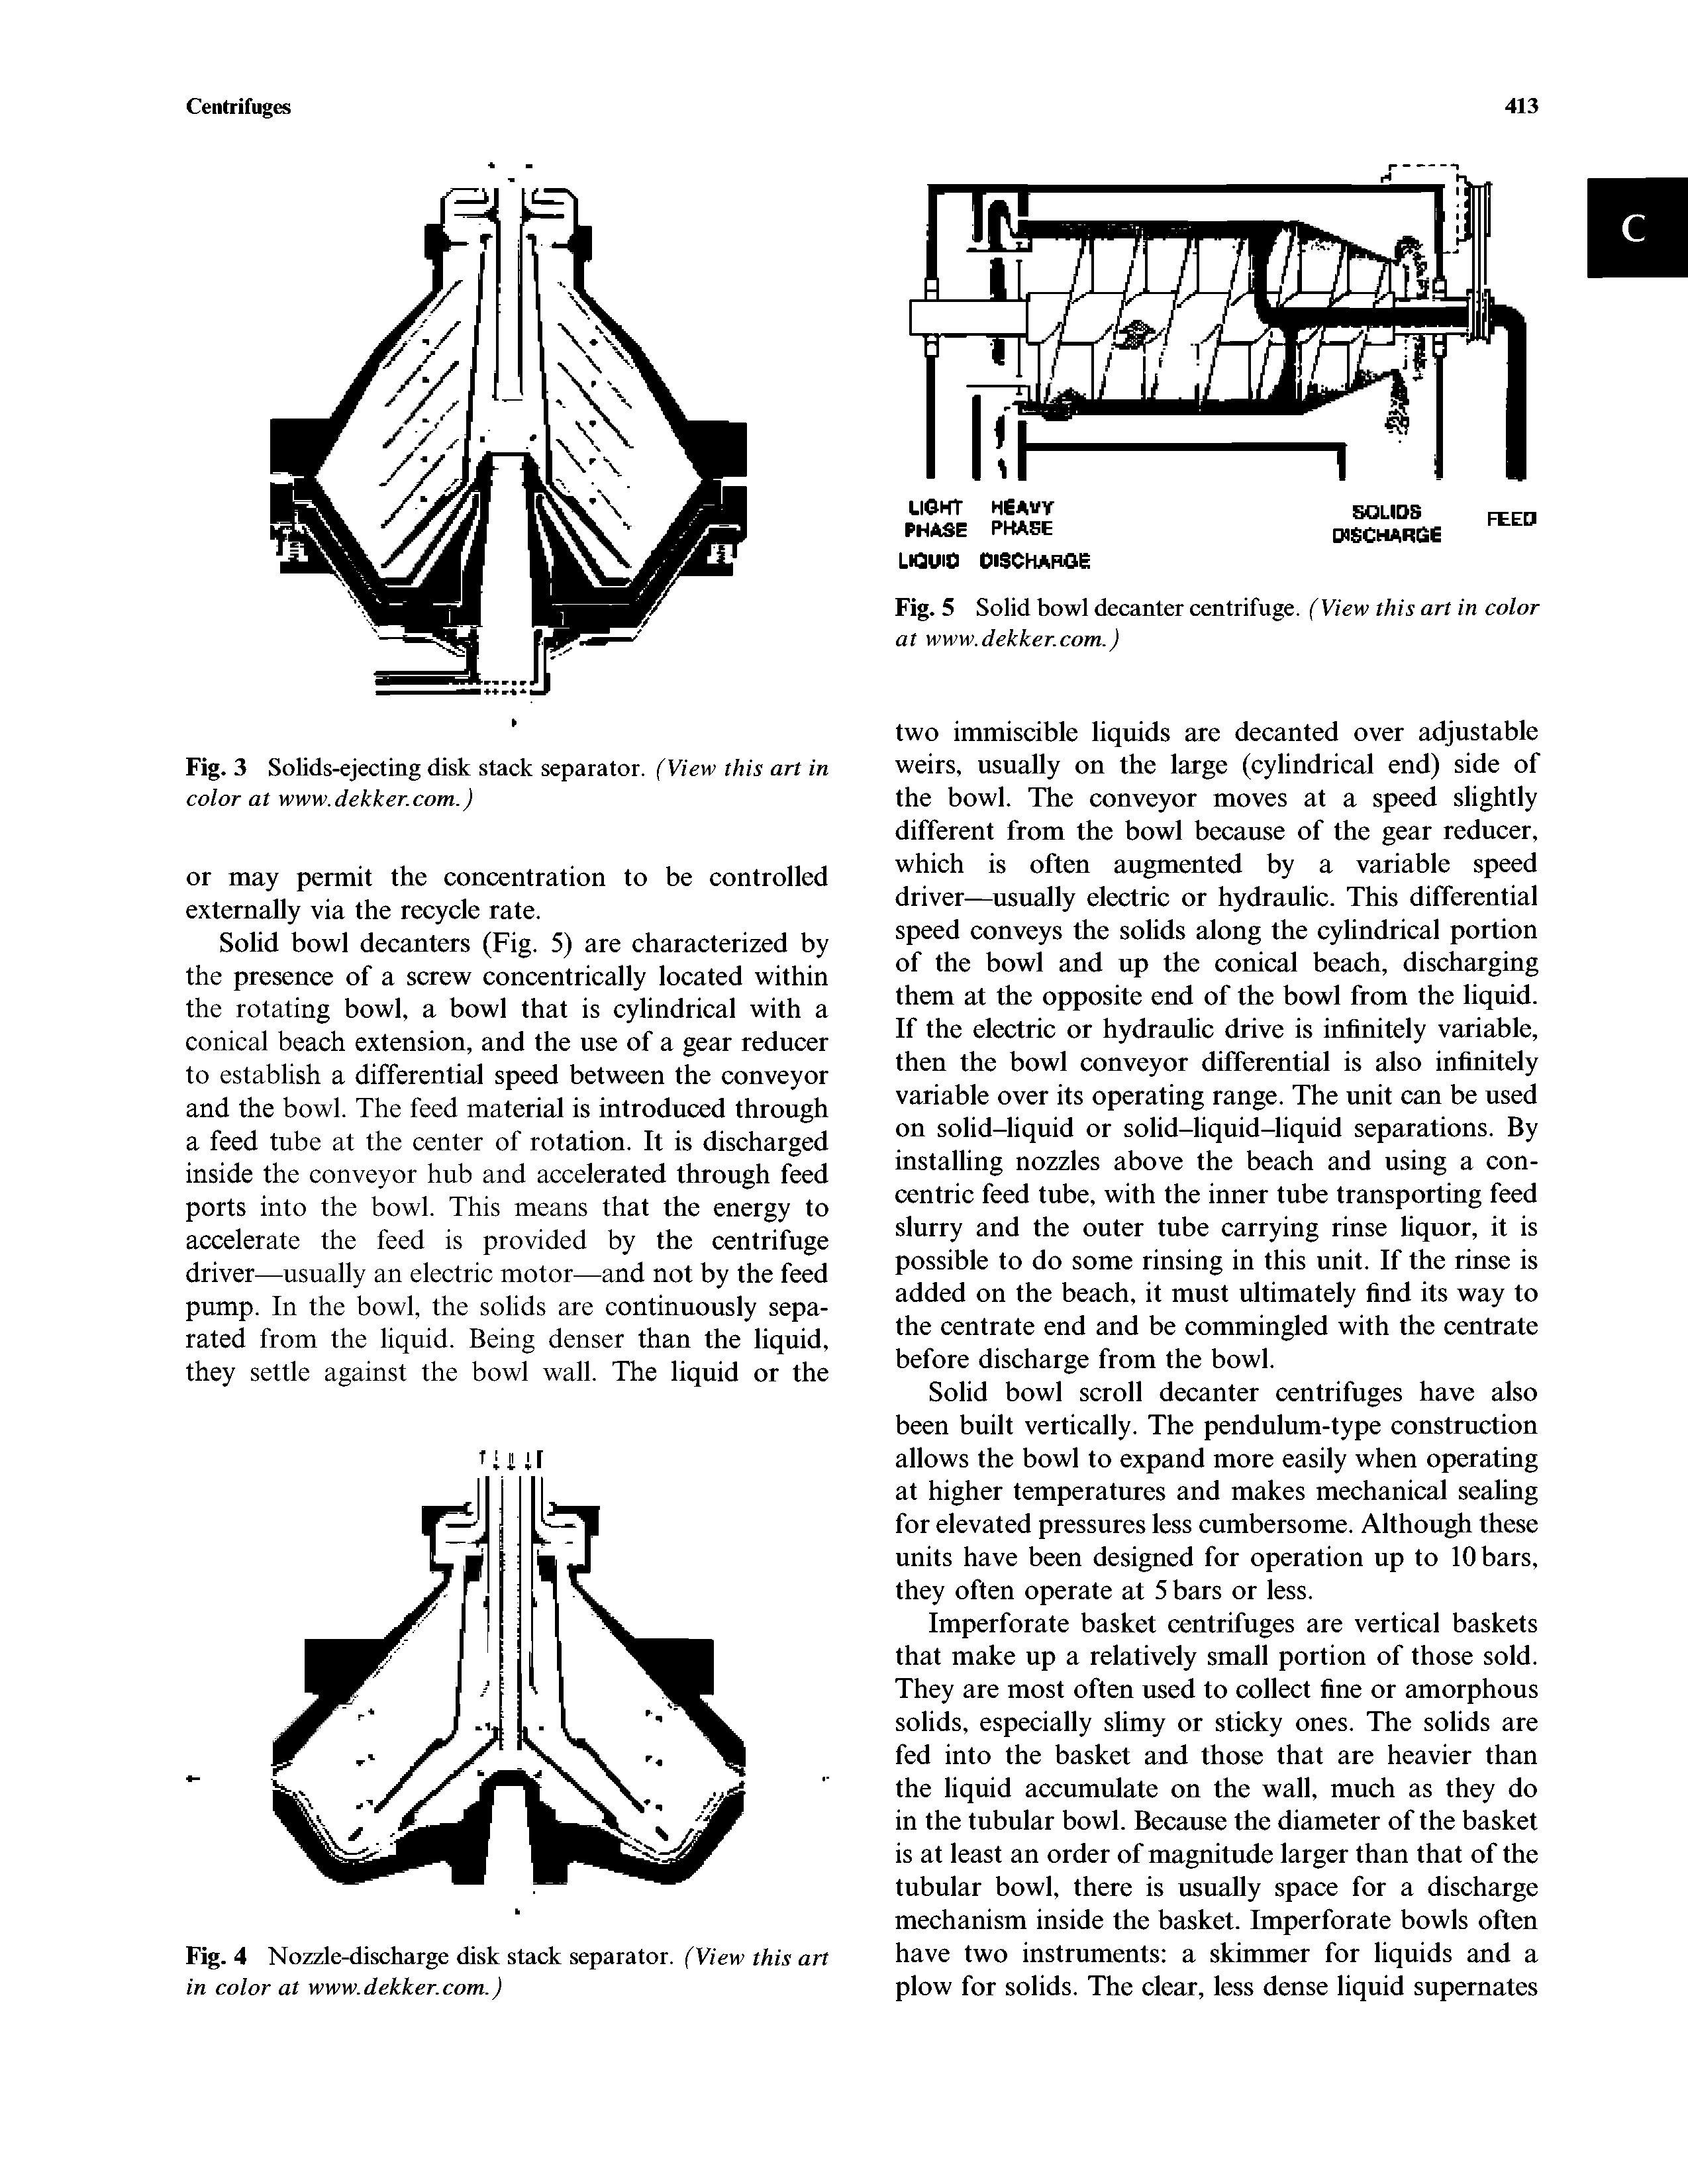 Fig. 5 Solid bowl decanter centrifuge. (View this art in color at www.dekker.com.)...